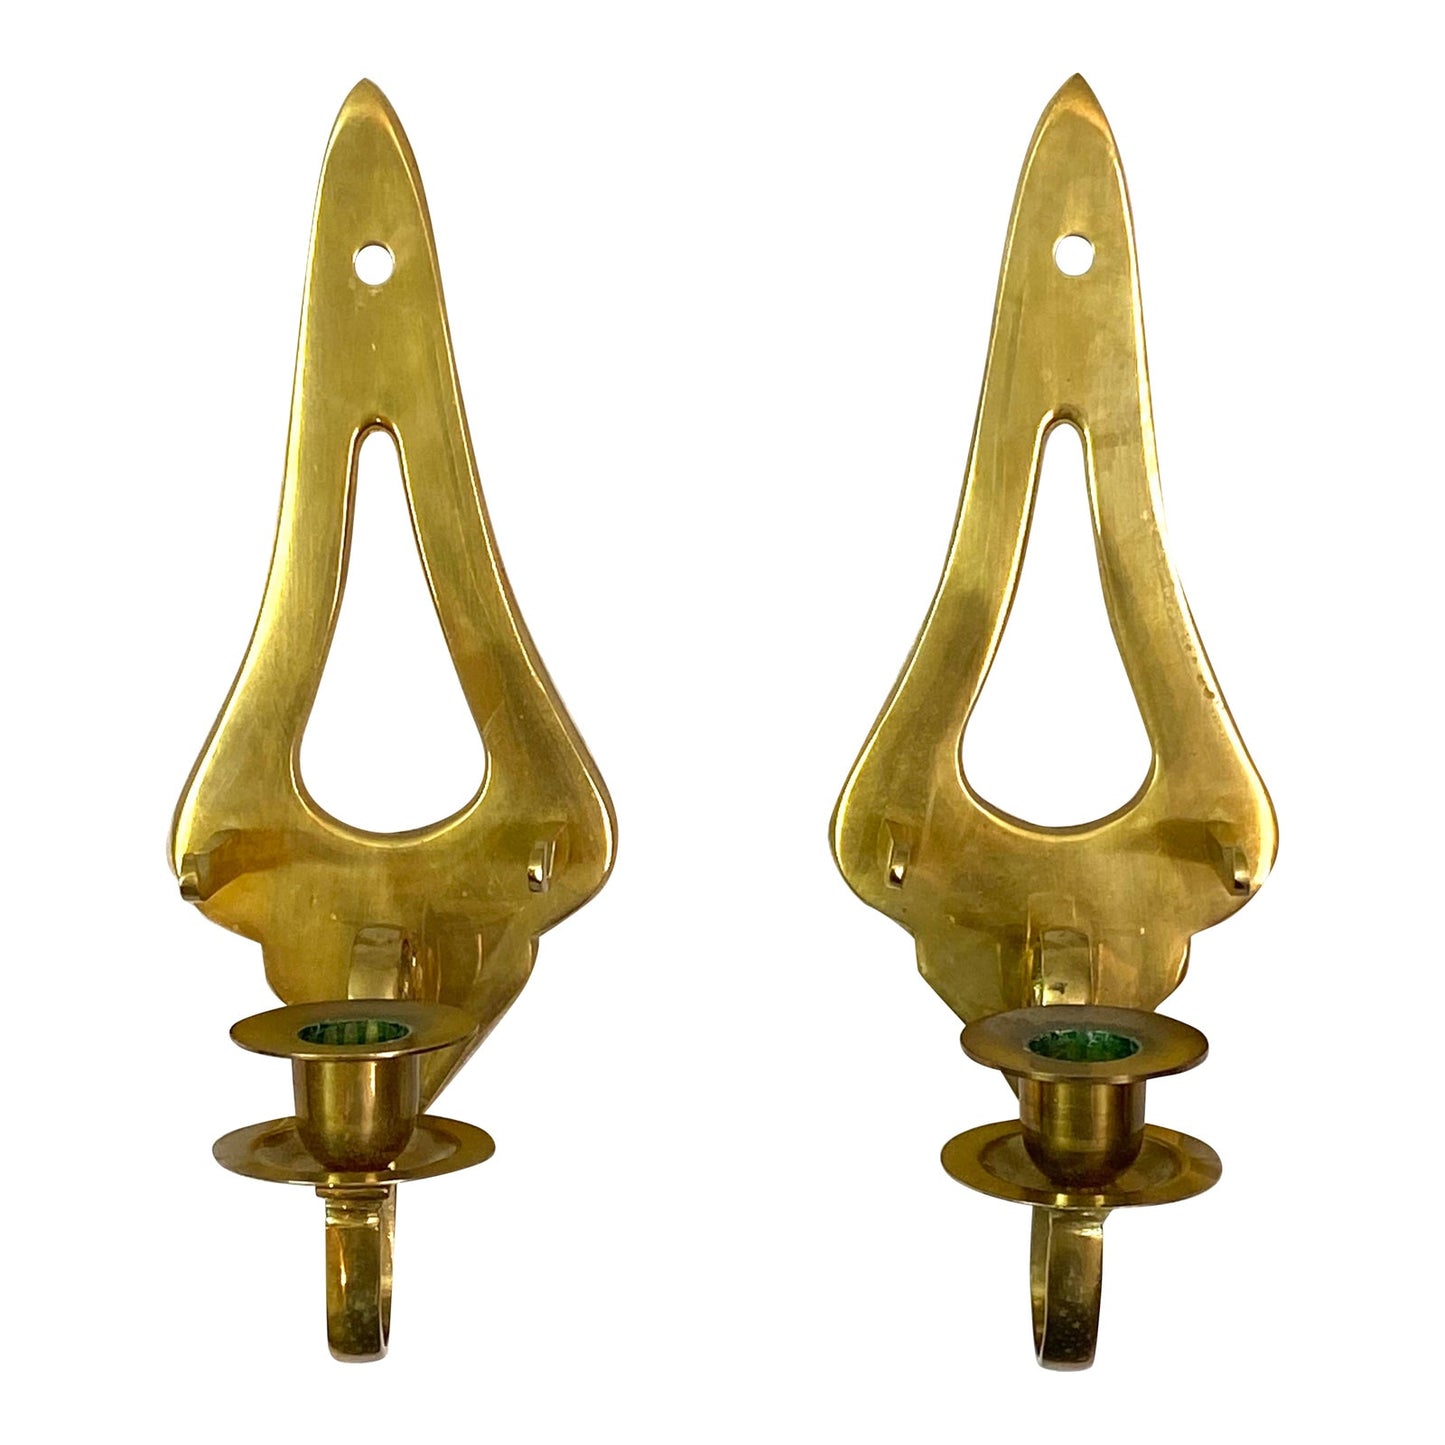 Art Deco Italian Brass Candle Holder Sconces - Pair of 2